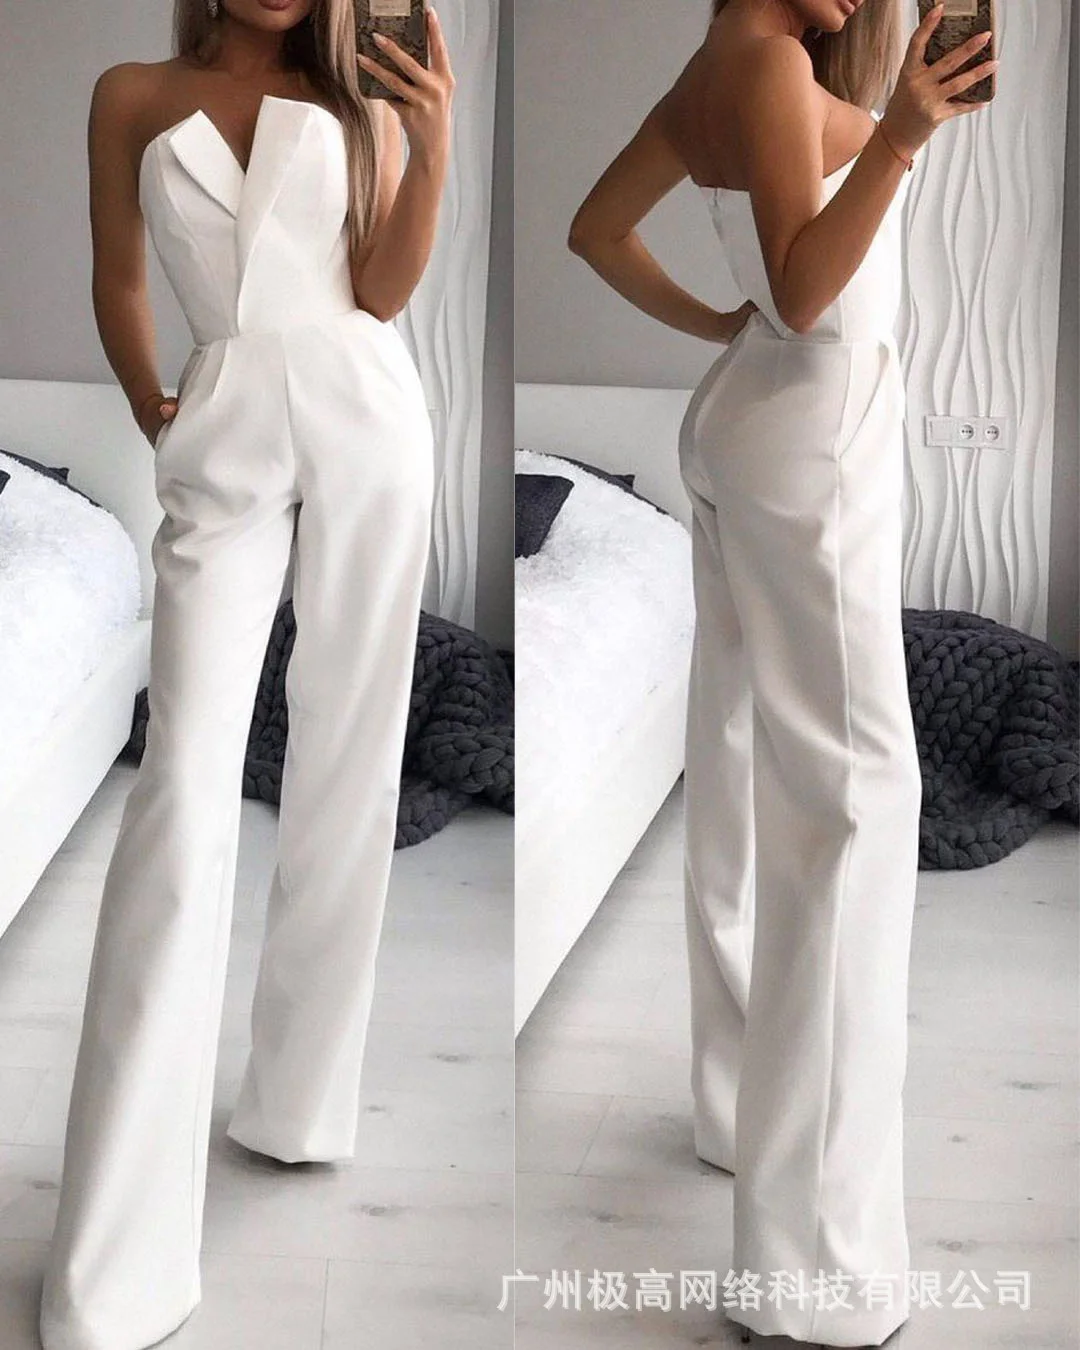 Tanguoant Strapless Jumpsuits 2022 Summer New Elegant Sleeveless Black White Red Slim Office Lady Jumpsuit